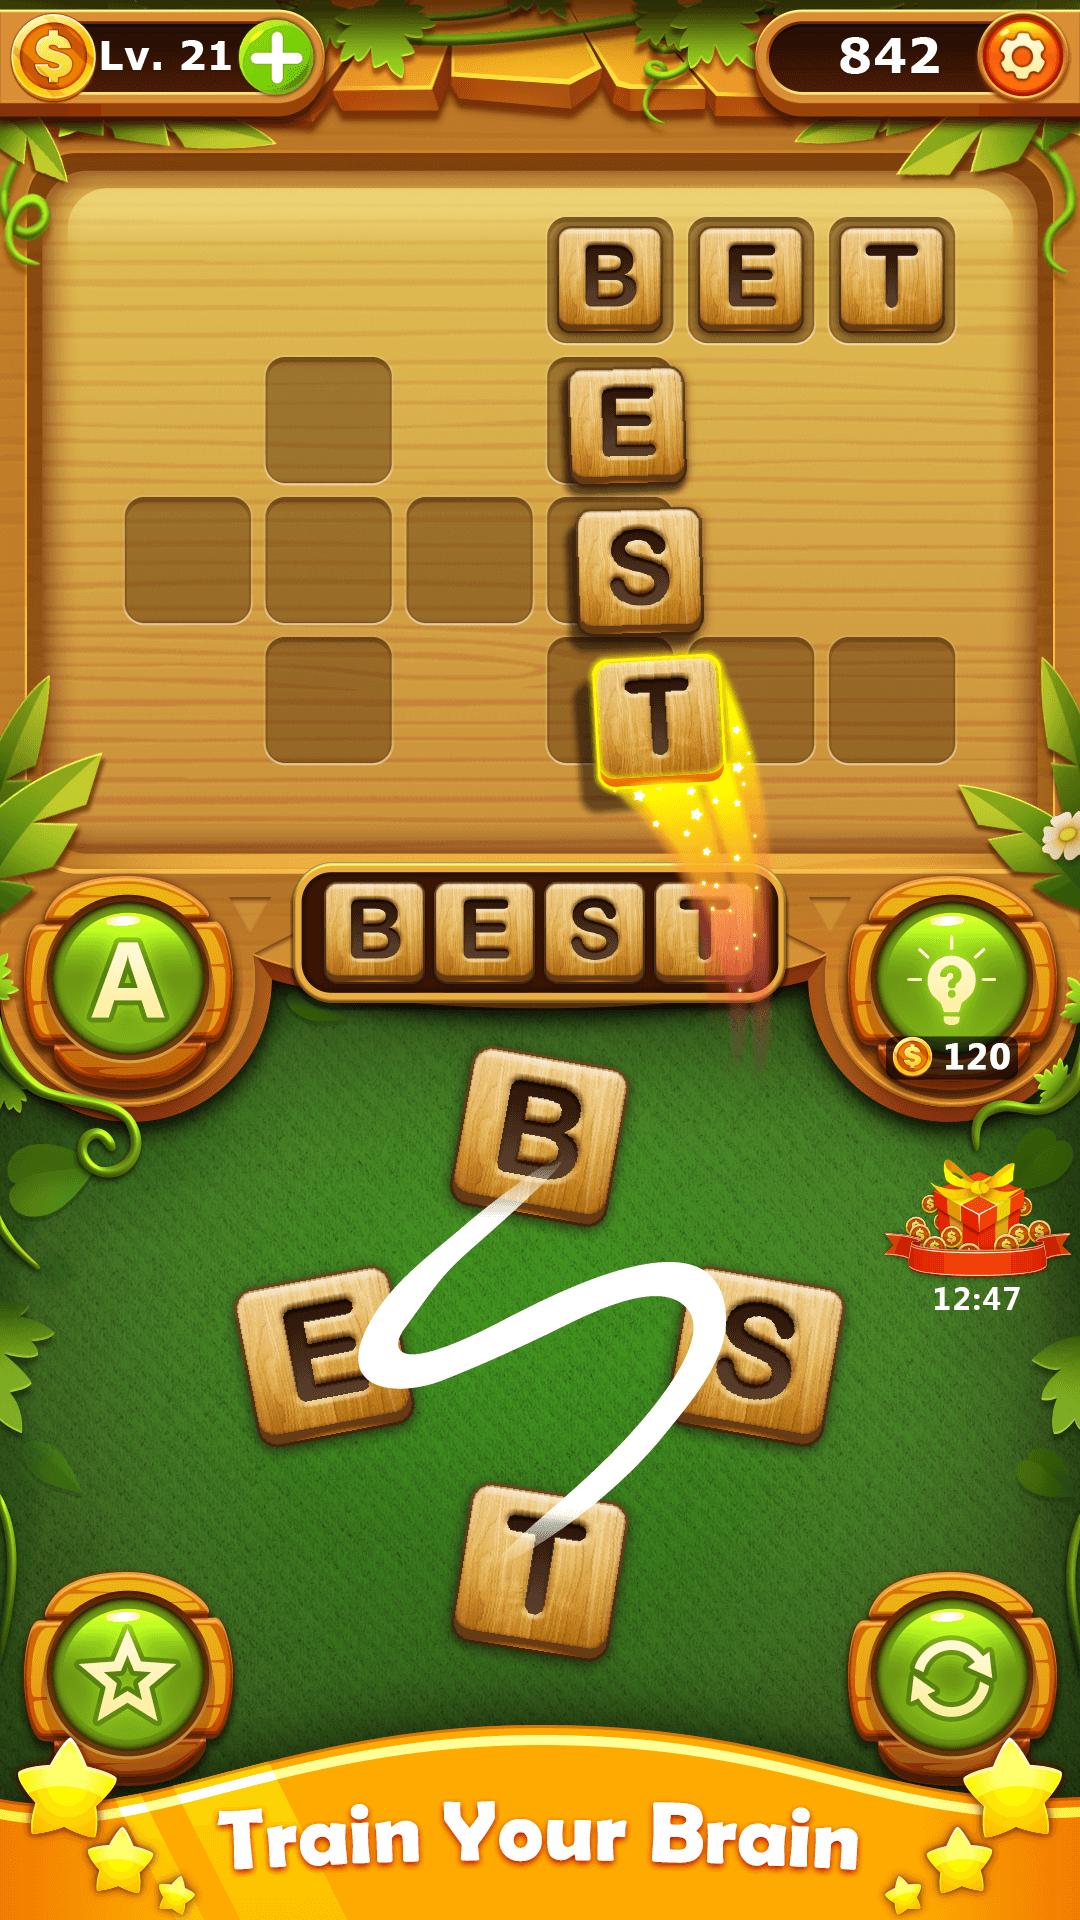 play-word-games-online-free